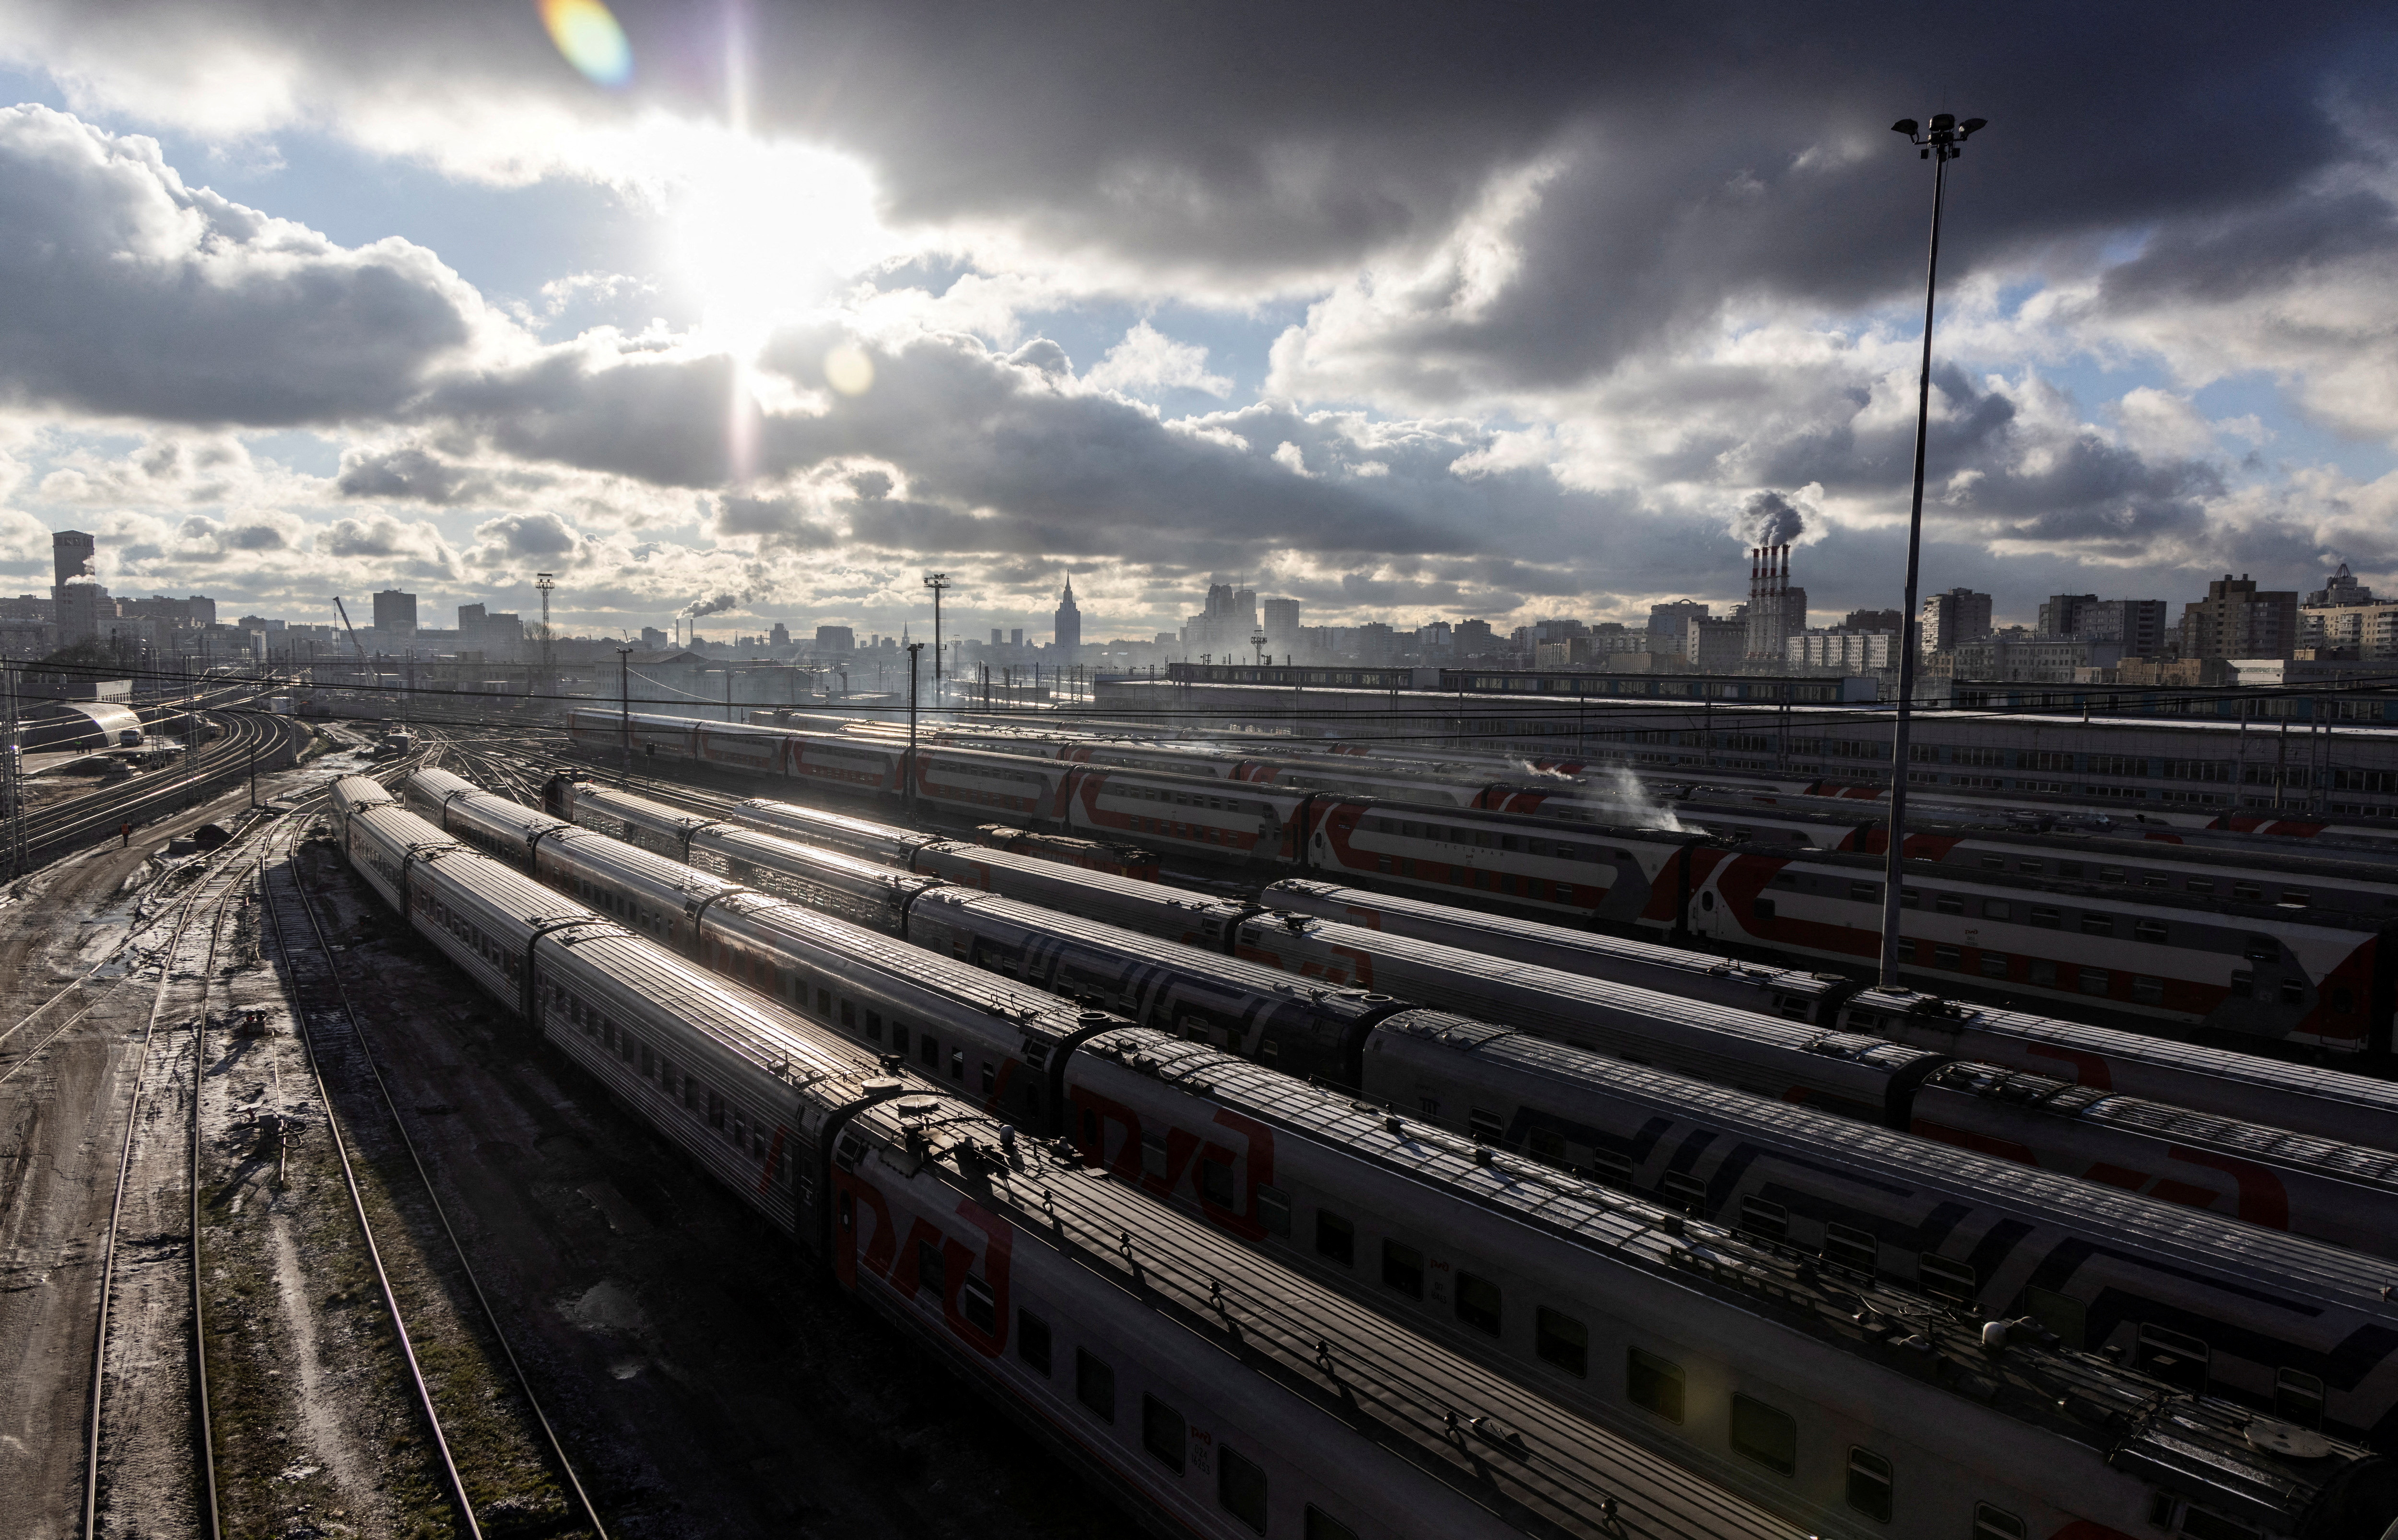 Views of railway station in Moscow